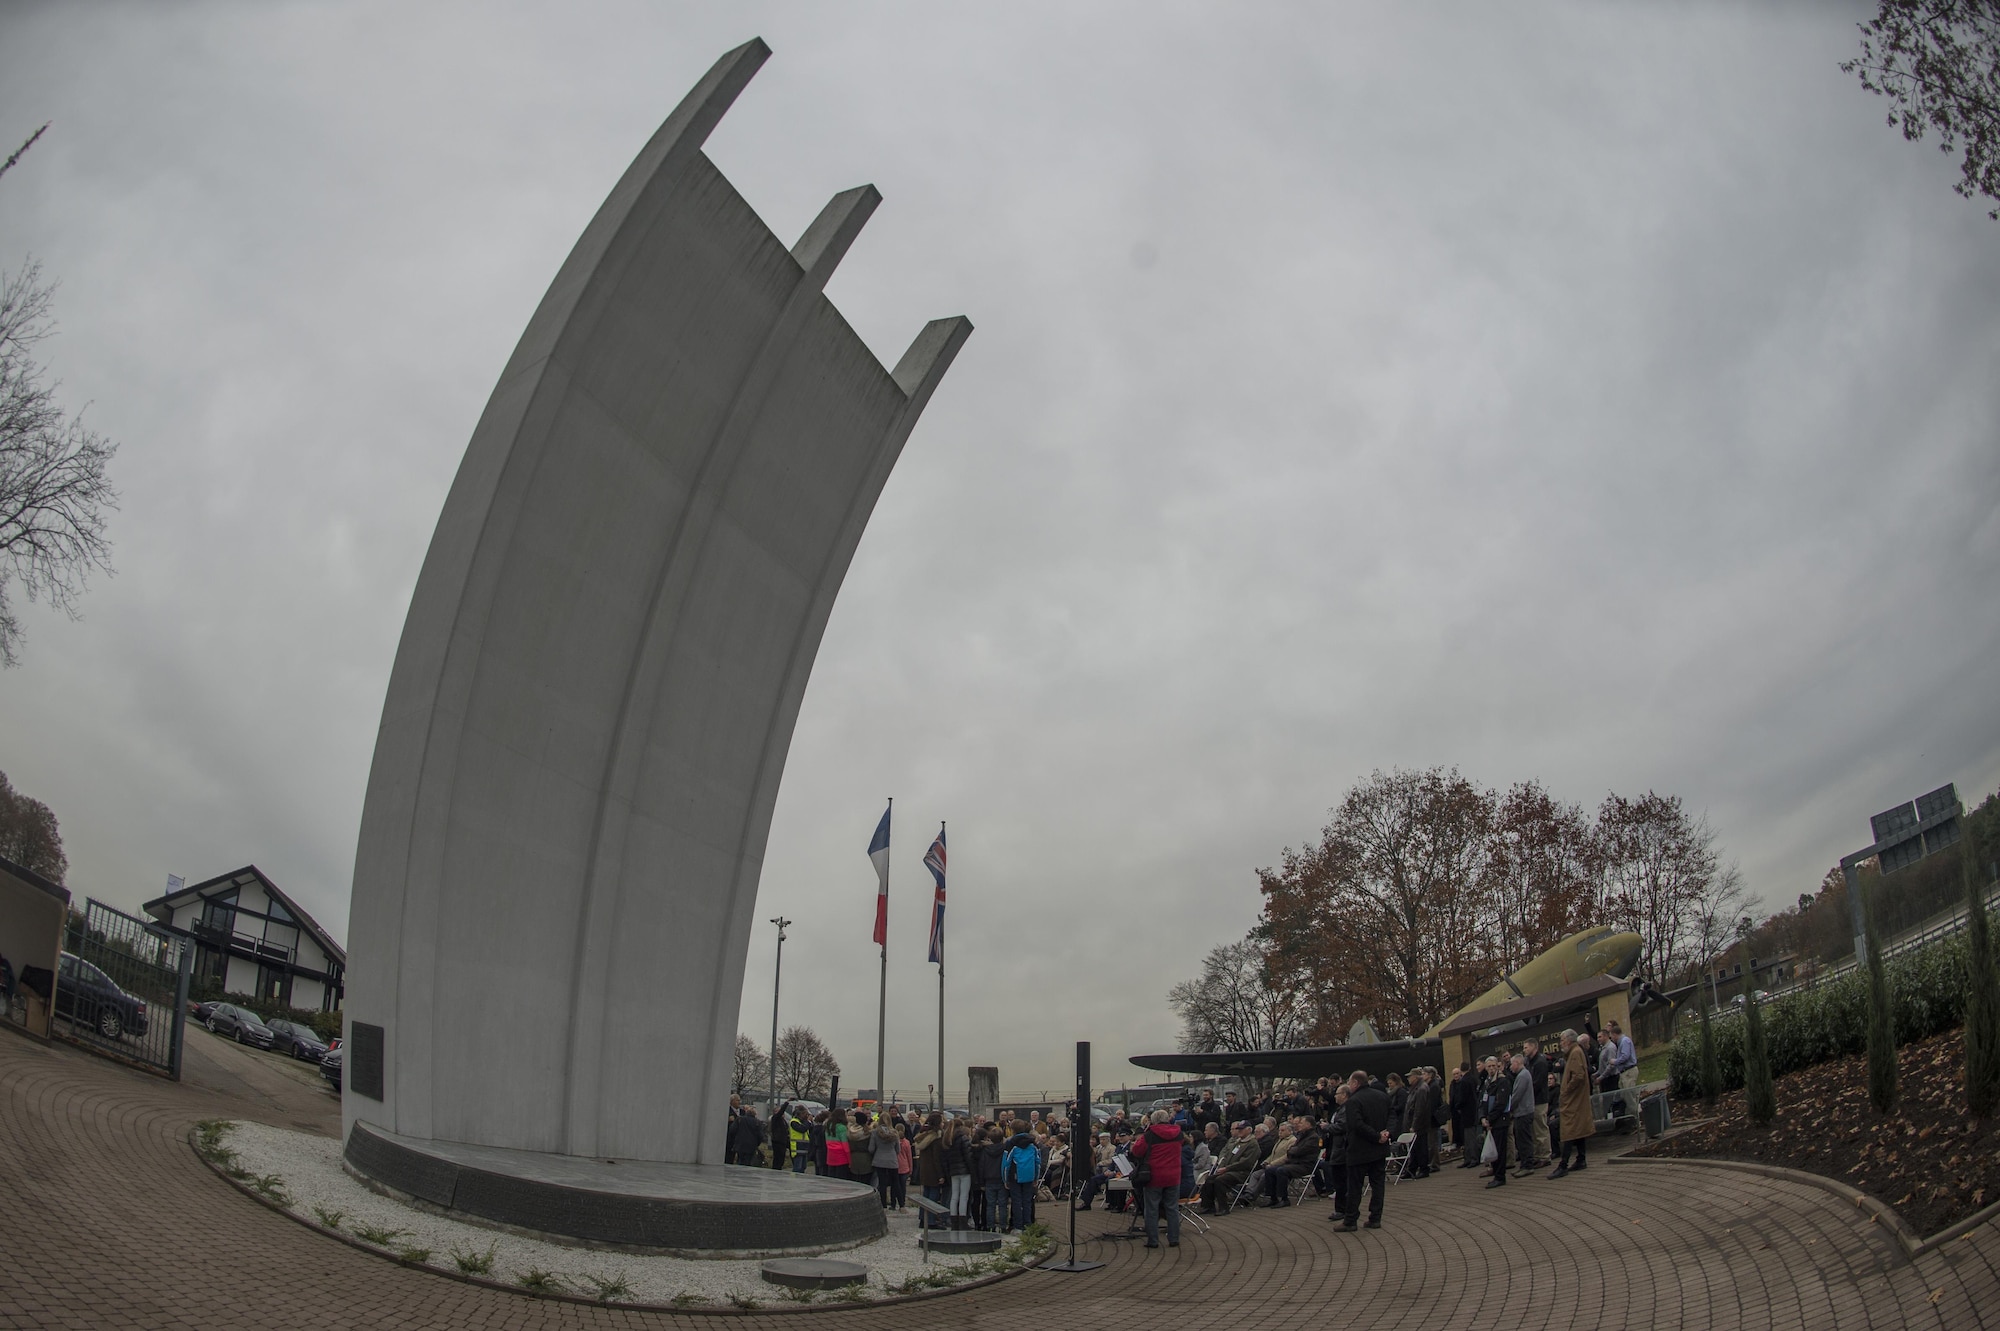 Dozens of Germans and Americans gather for the reopening ceremony of the Berlin Airlift Memorial at Frankfurt International Airport, Germany, Nov. 22, 2016. The memorial, which features a corresponding tower in Berlin, Germany, commemorates the two launchpads for the humanitarian airlift conducted by the U.S. and British air forces to deliver food and supplies to the blockaded citizens of West Berlin between June 1948 and September 1949. (U.S. Air Force photo by Staff Sgt. Joe W. McFadden)